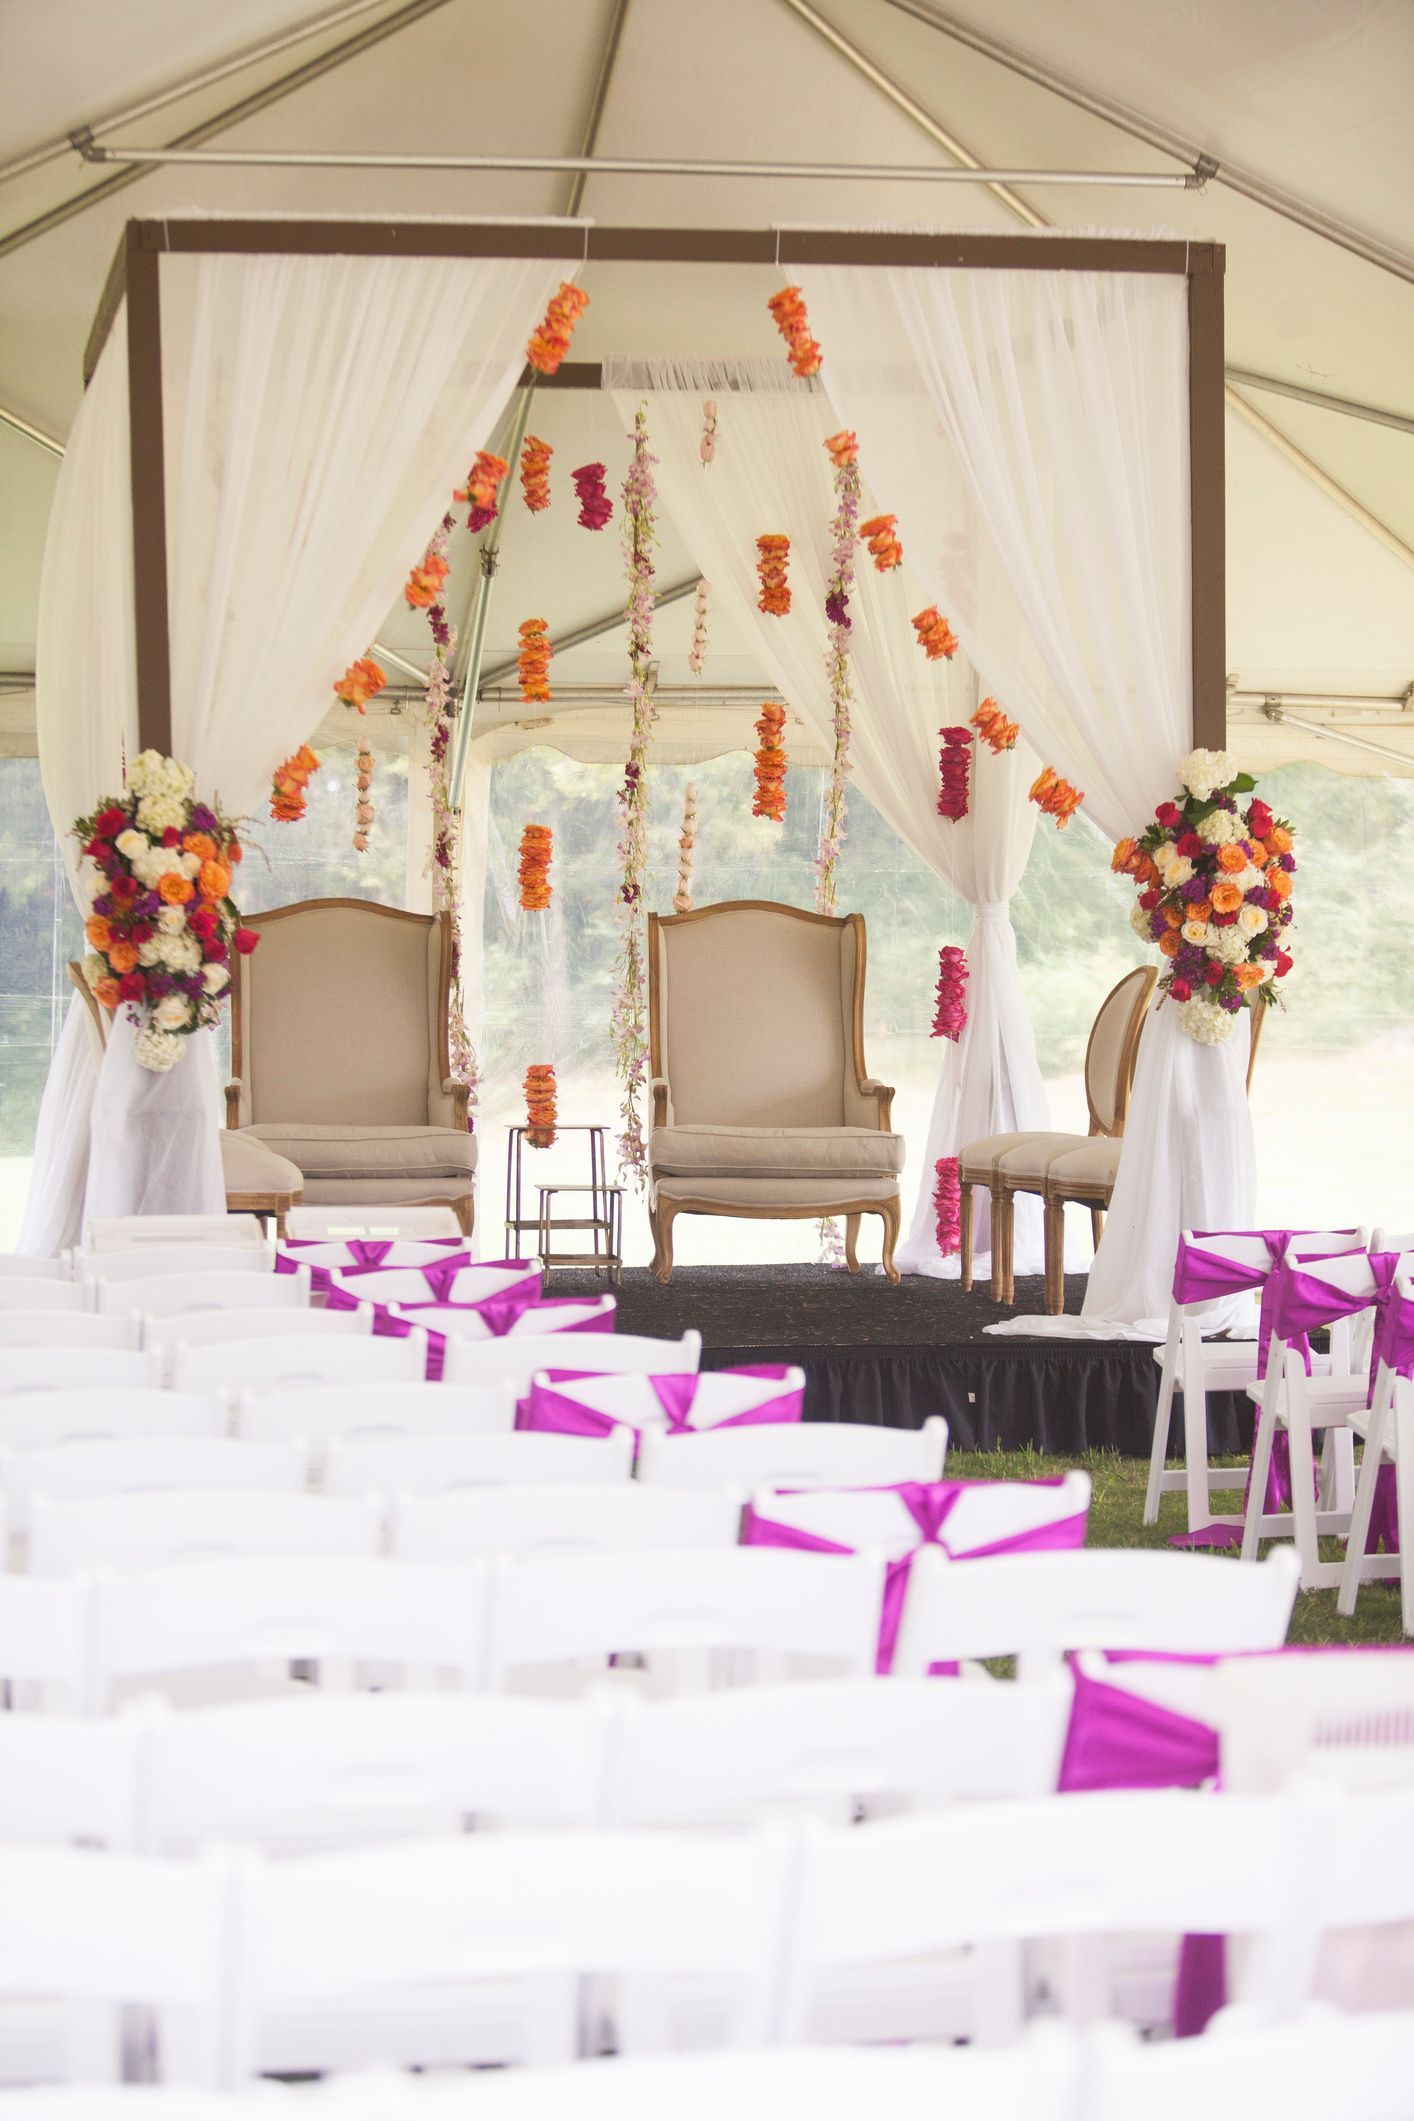 Denise & Nick's Wedding ceremony is taking place under a tent with white chairs and purple sashes by Wedding Planner Nashville